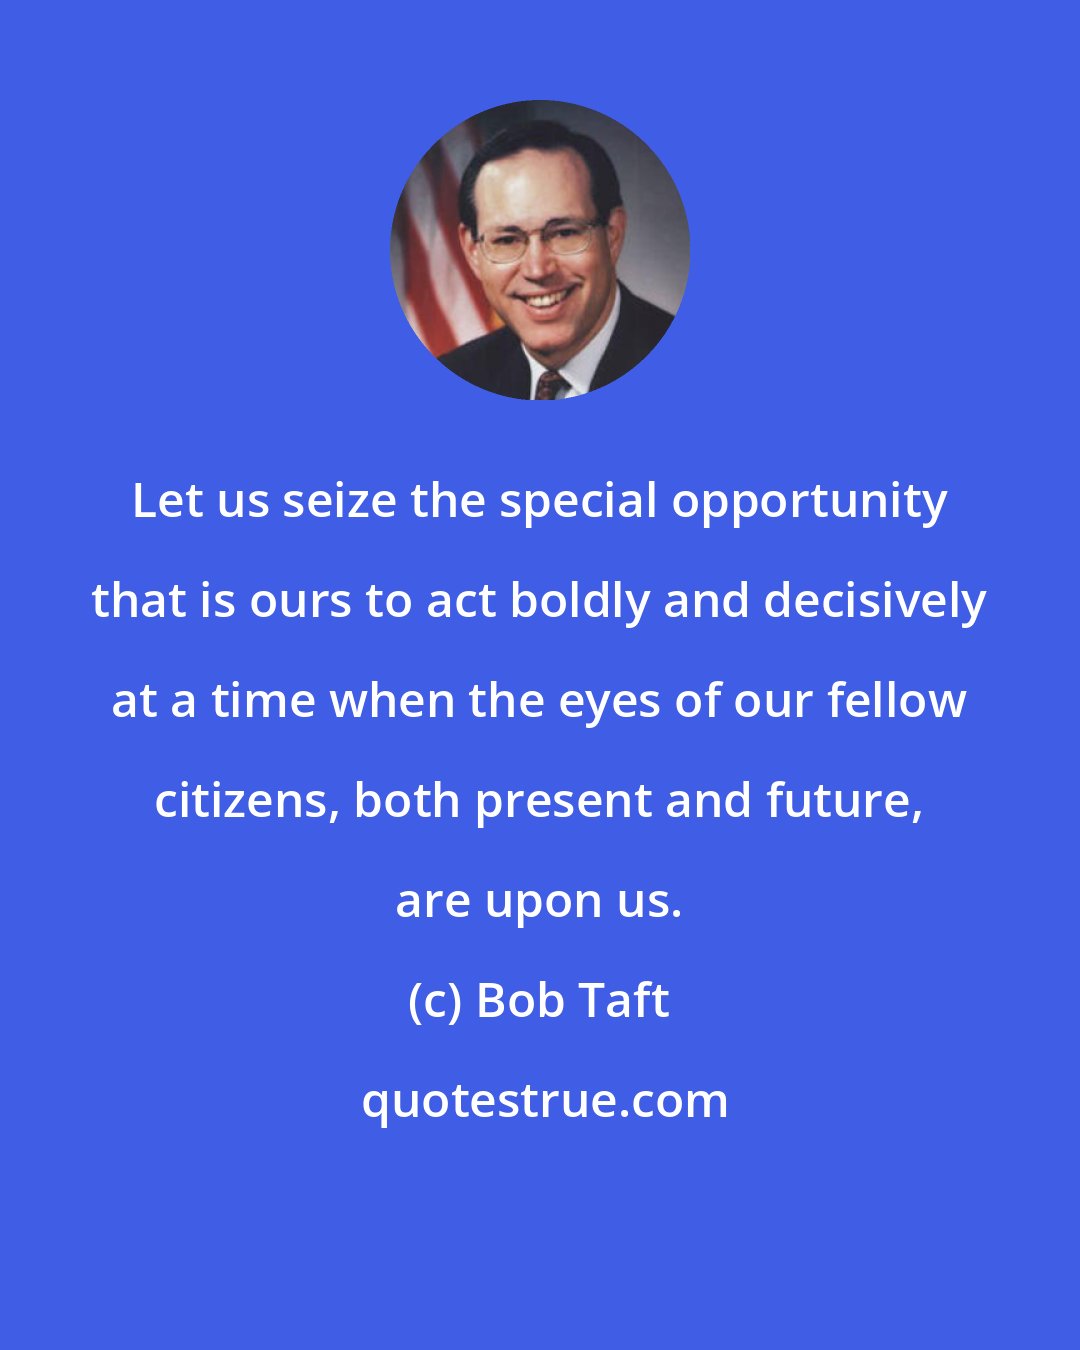 Bob Taft: Let us seize the special opportunity that is ours to act boldly and decisively at a time when the eyes of our fellow citizens, both present and future, are upon us.